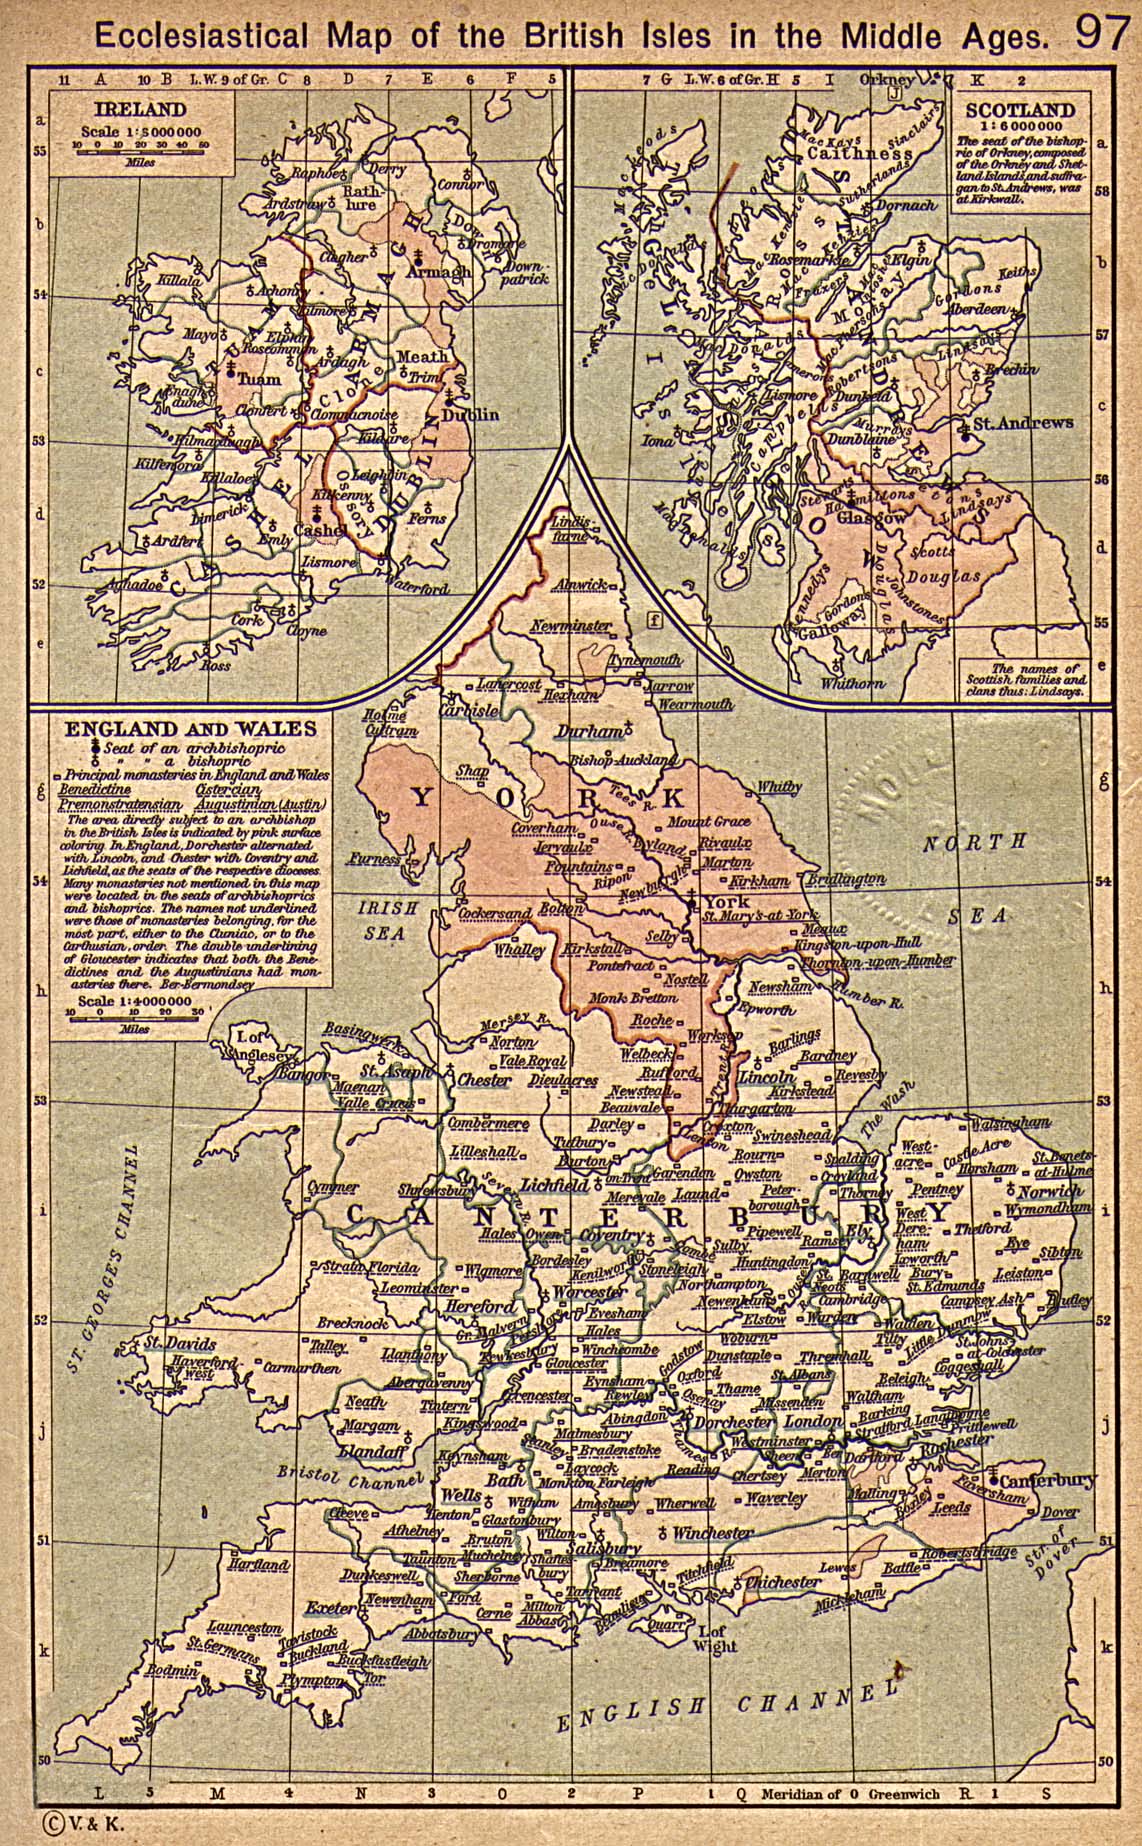 Ecclesiastical Map of the British Isles During the Middle Ages